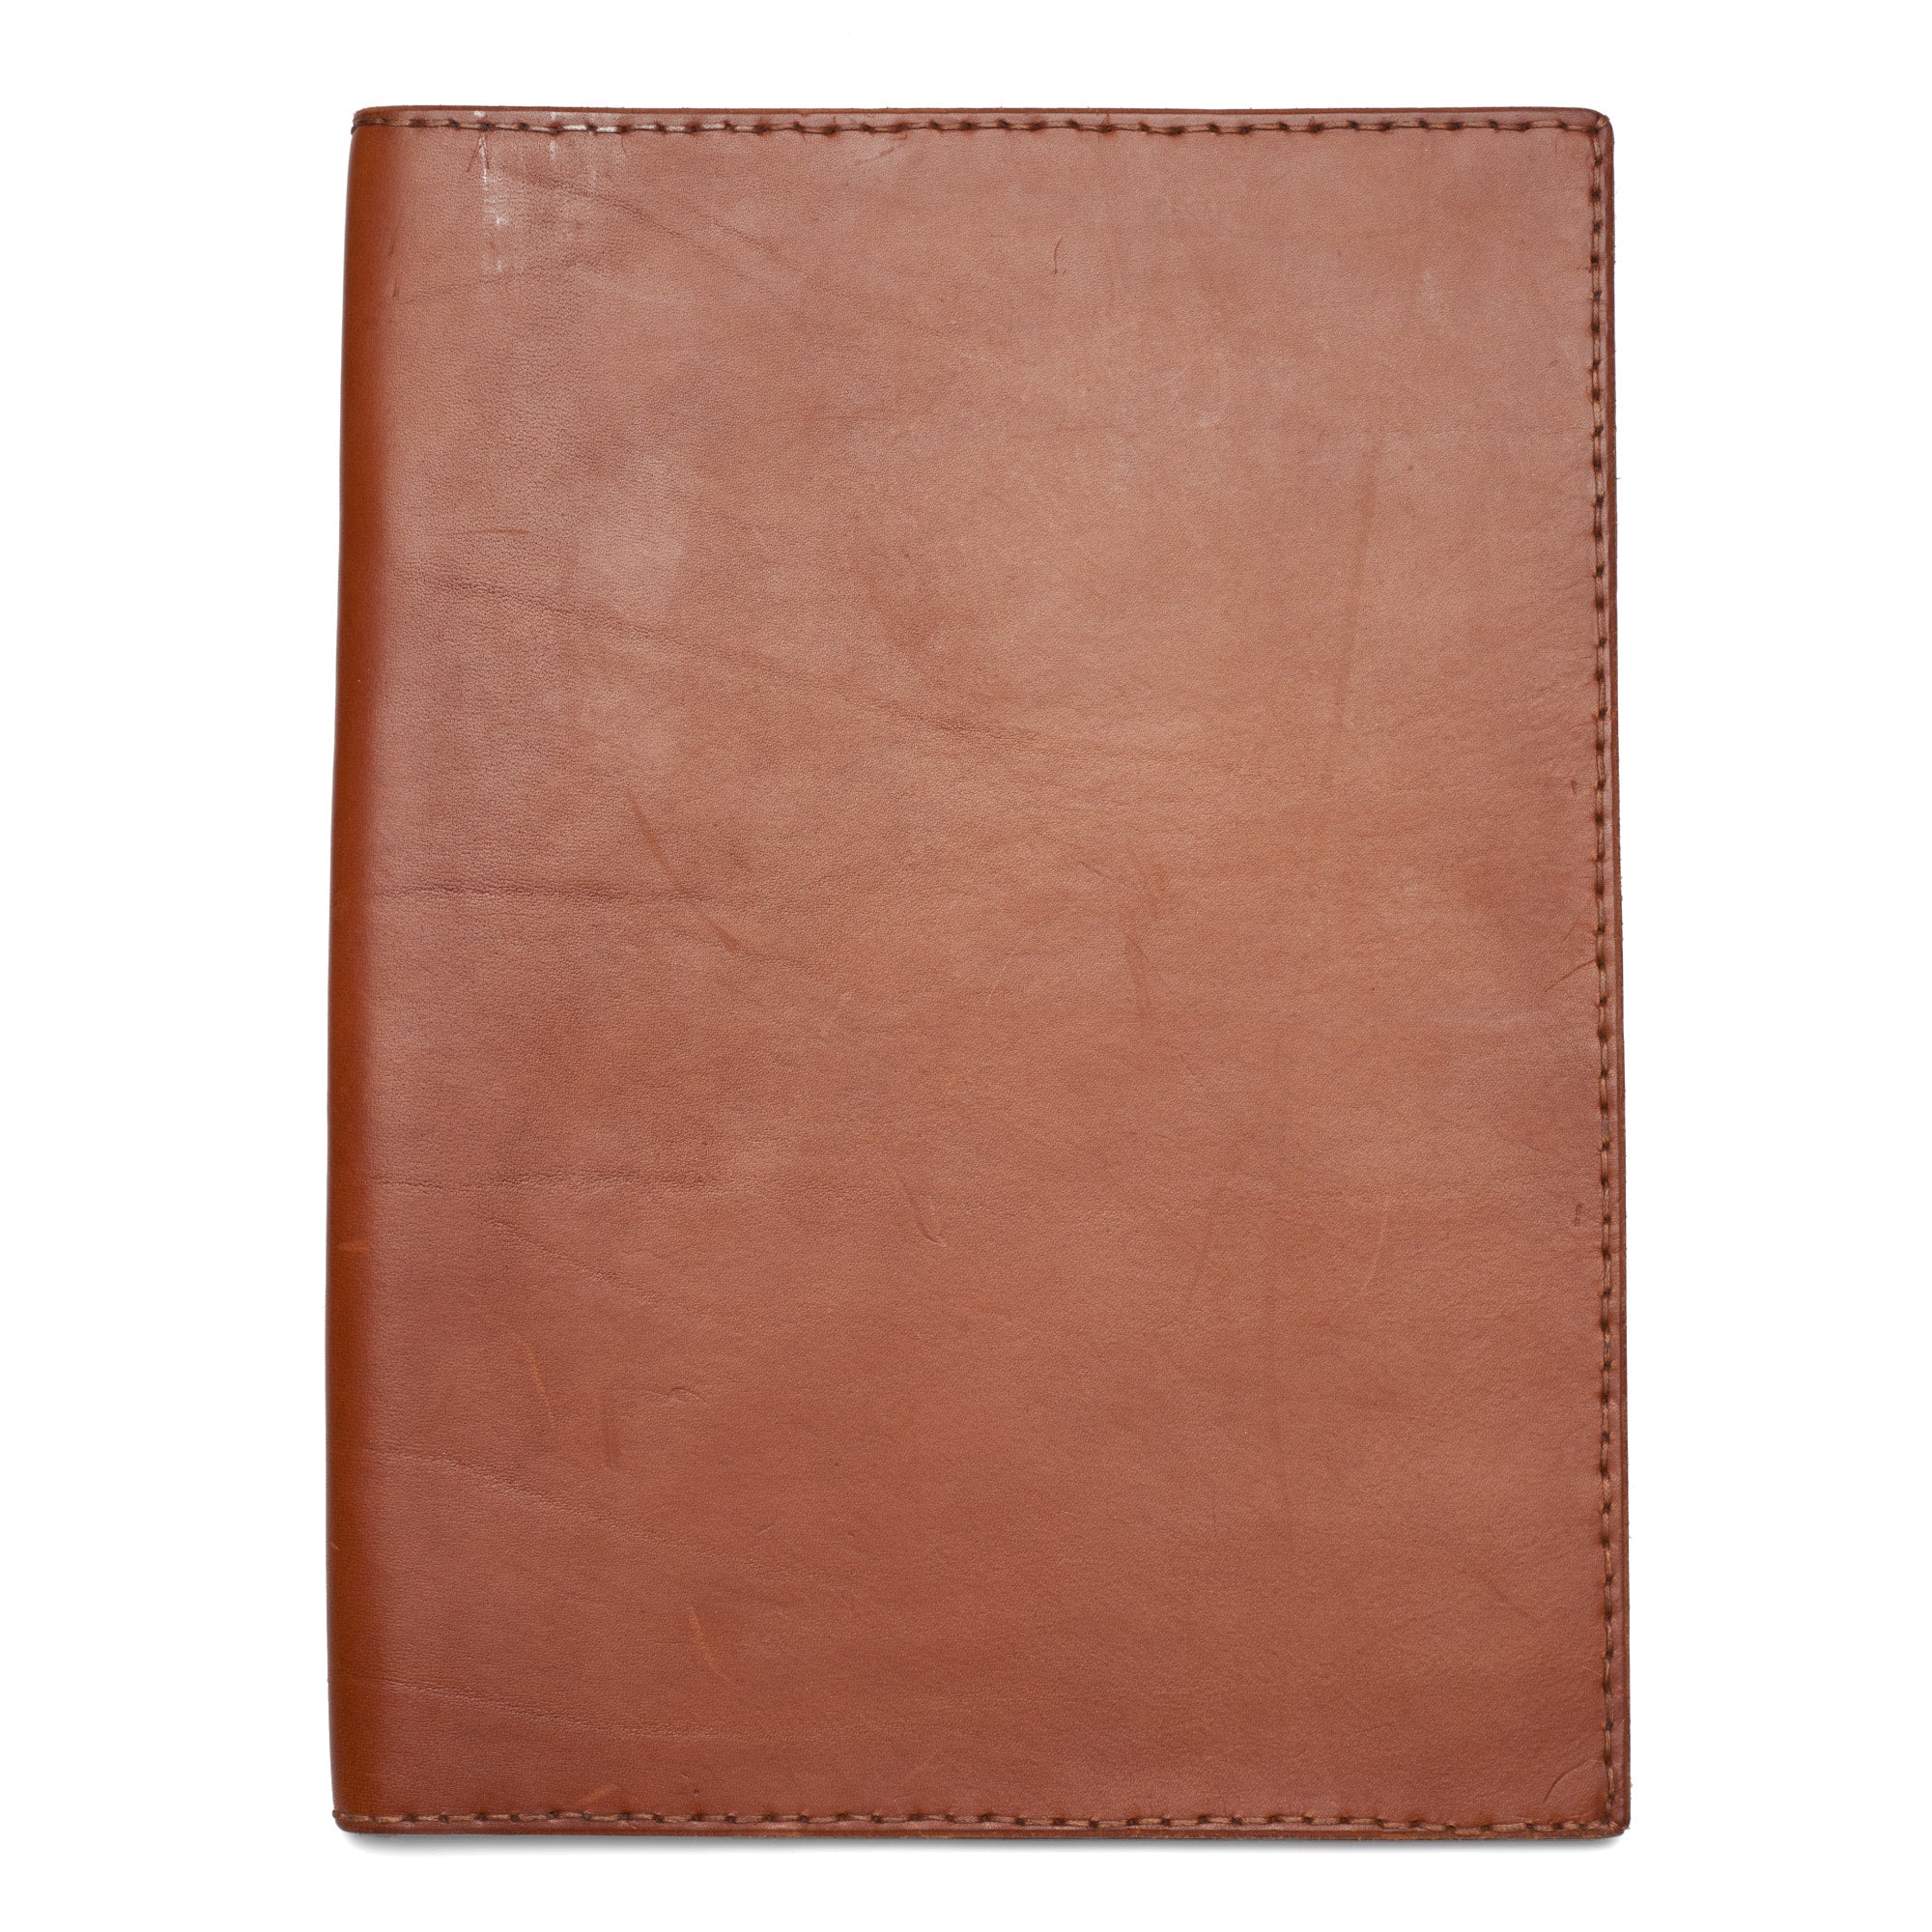 OLD HIDE ROMANELLI Cowhide Leather Notepad Cover Folio 32x24 ROMANELLI